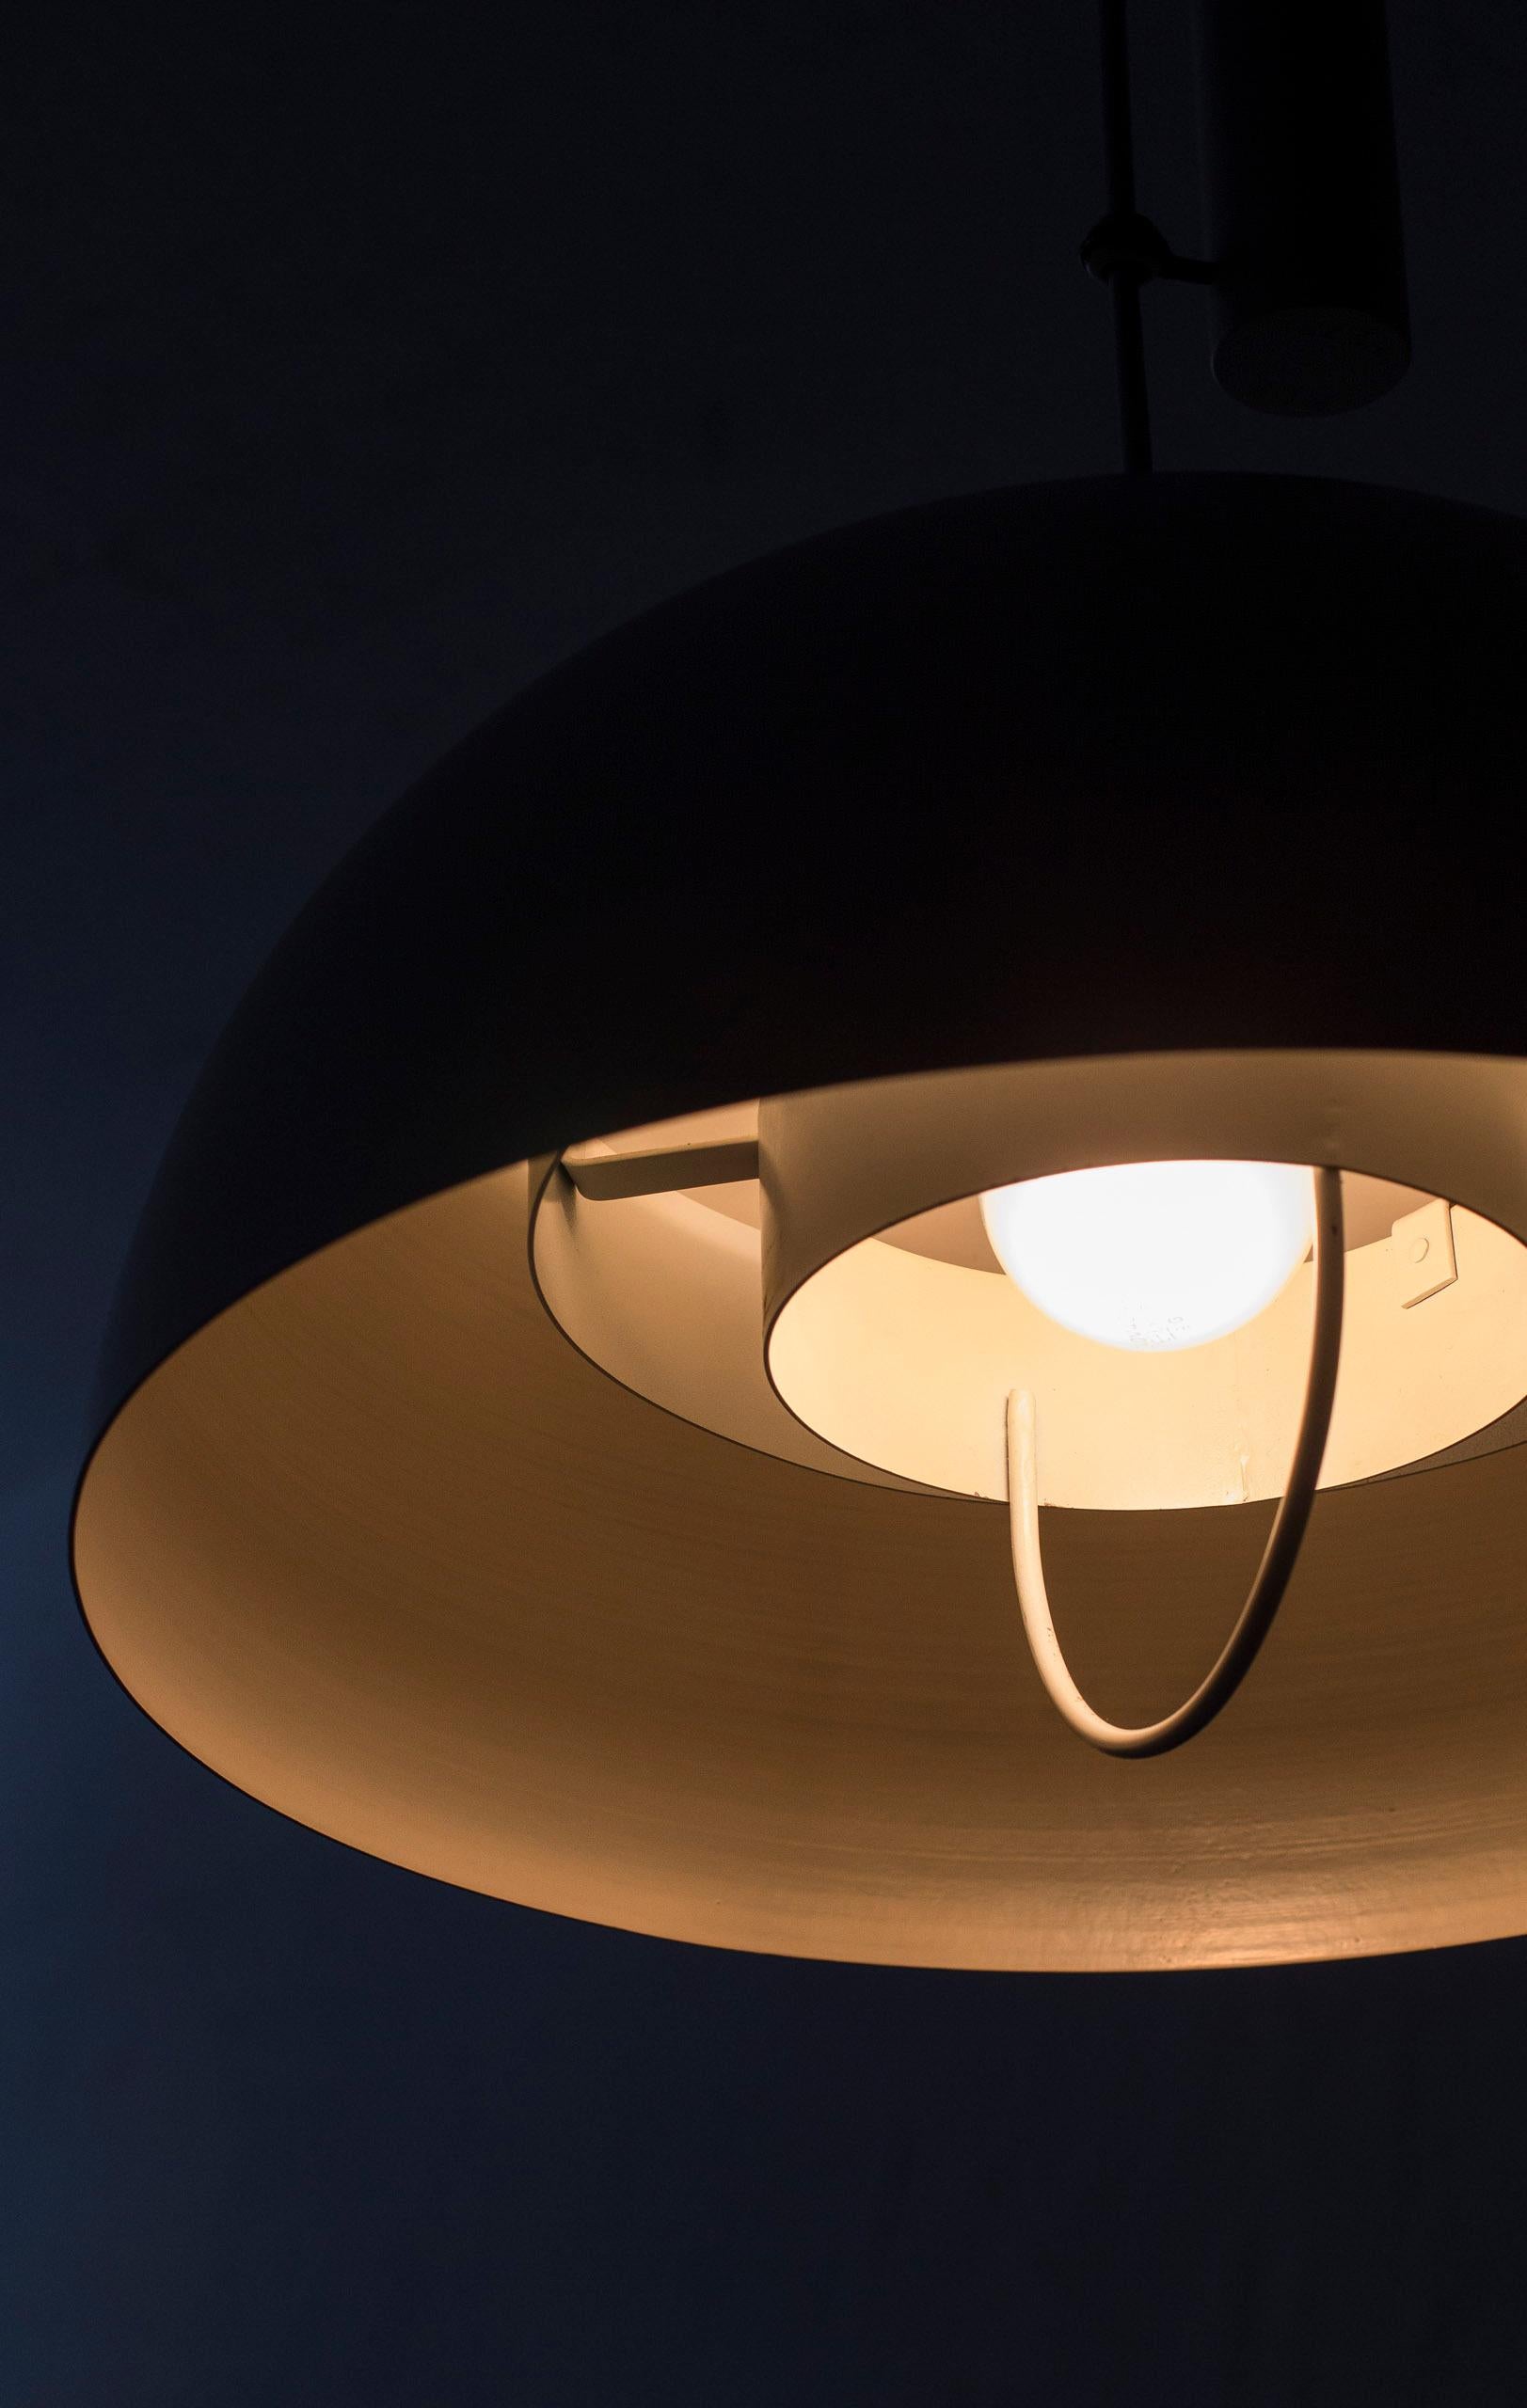 Pendant Lamps Attributed to Hans-Agne Jakobsson, Karlskron Lampfabrik, 1950s For Sale 4